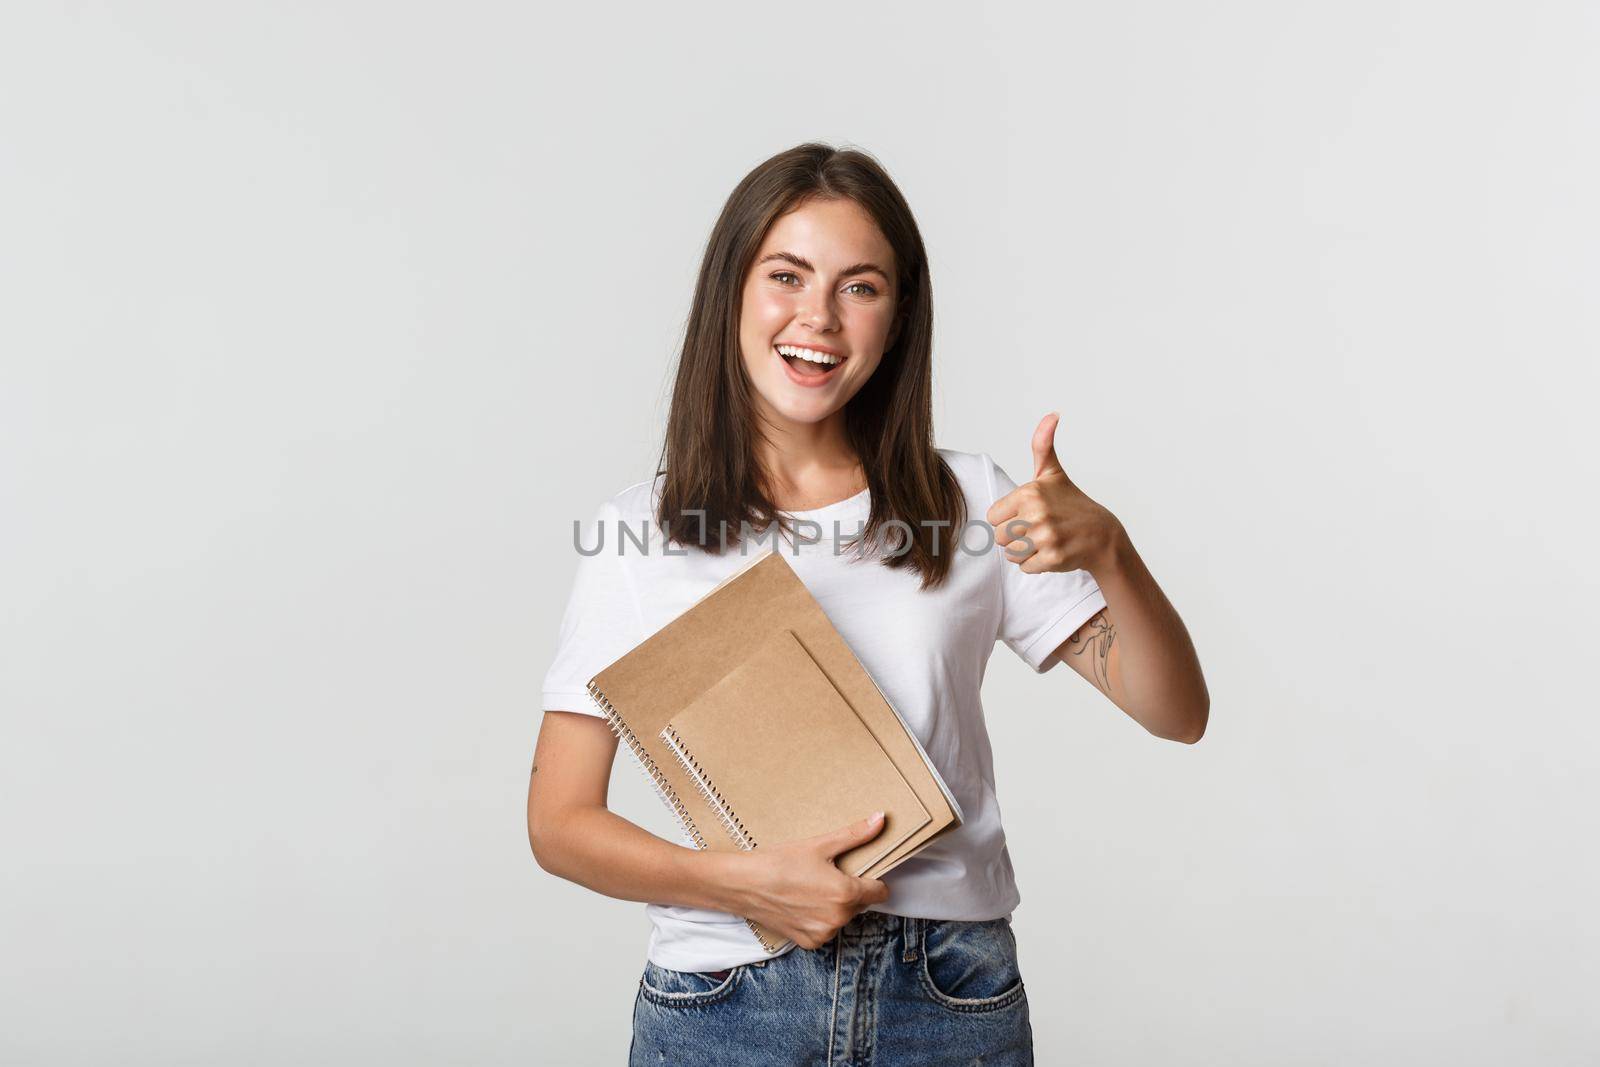 Cheerful smiling girl holding notebooks and showing thumbs-up, recommend courses or school.